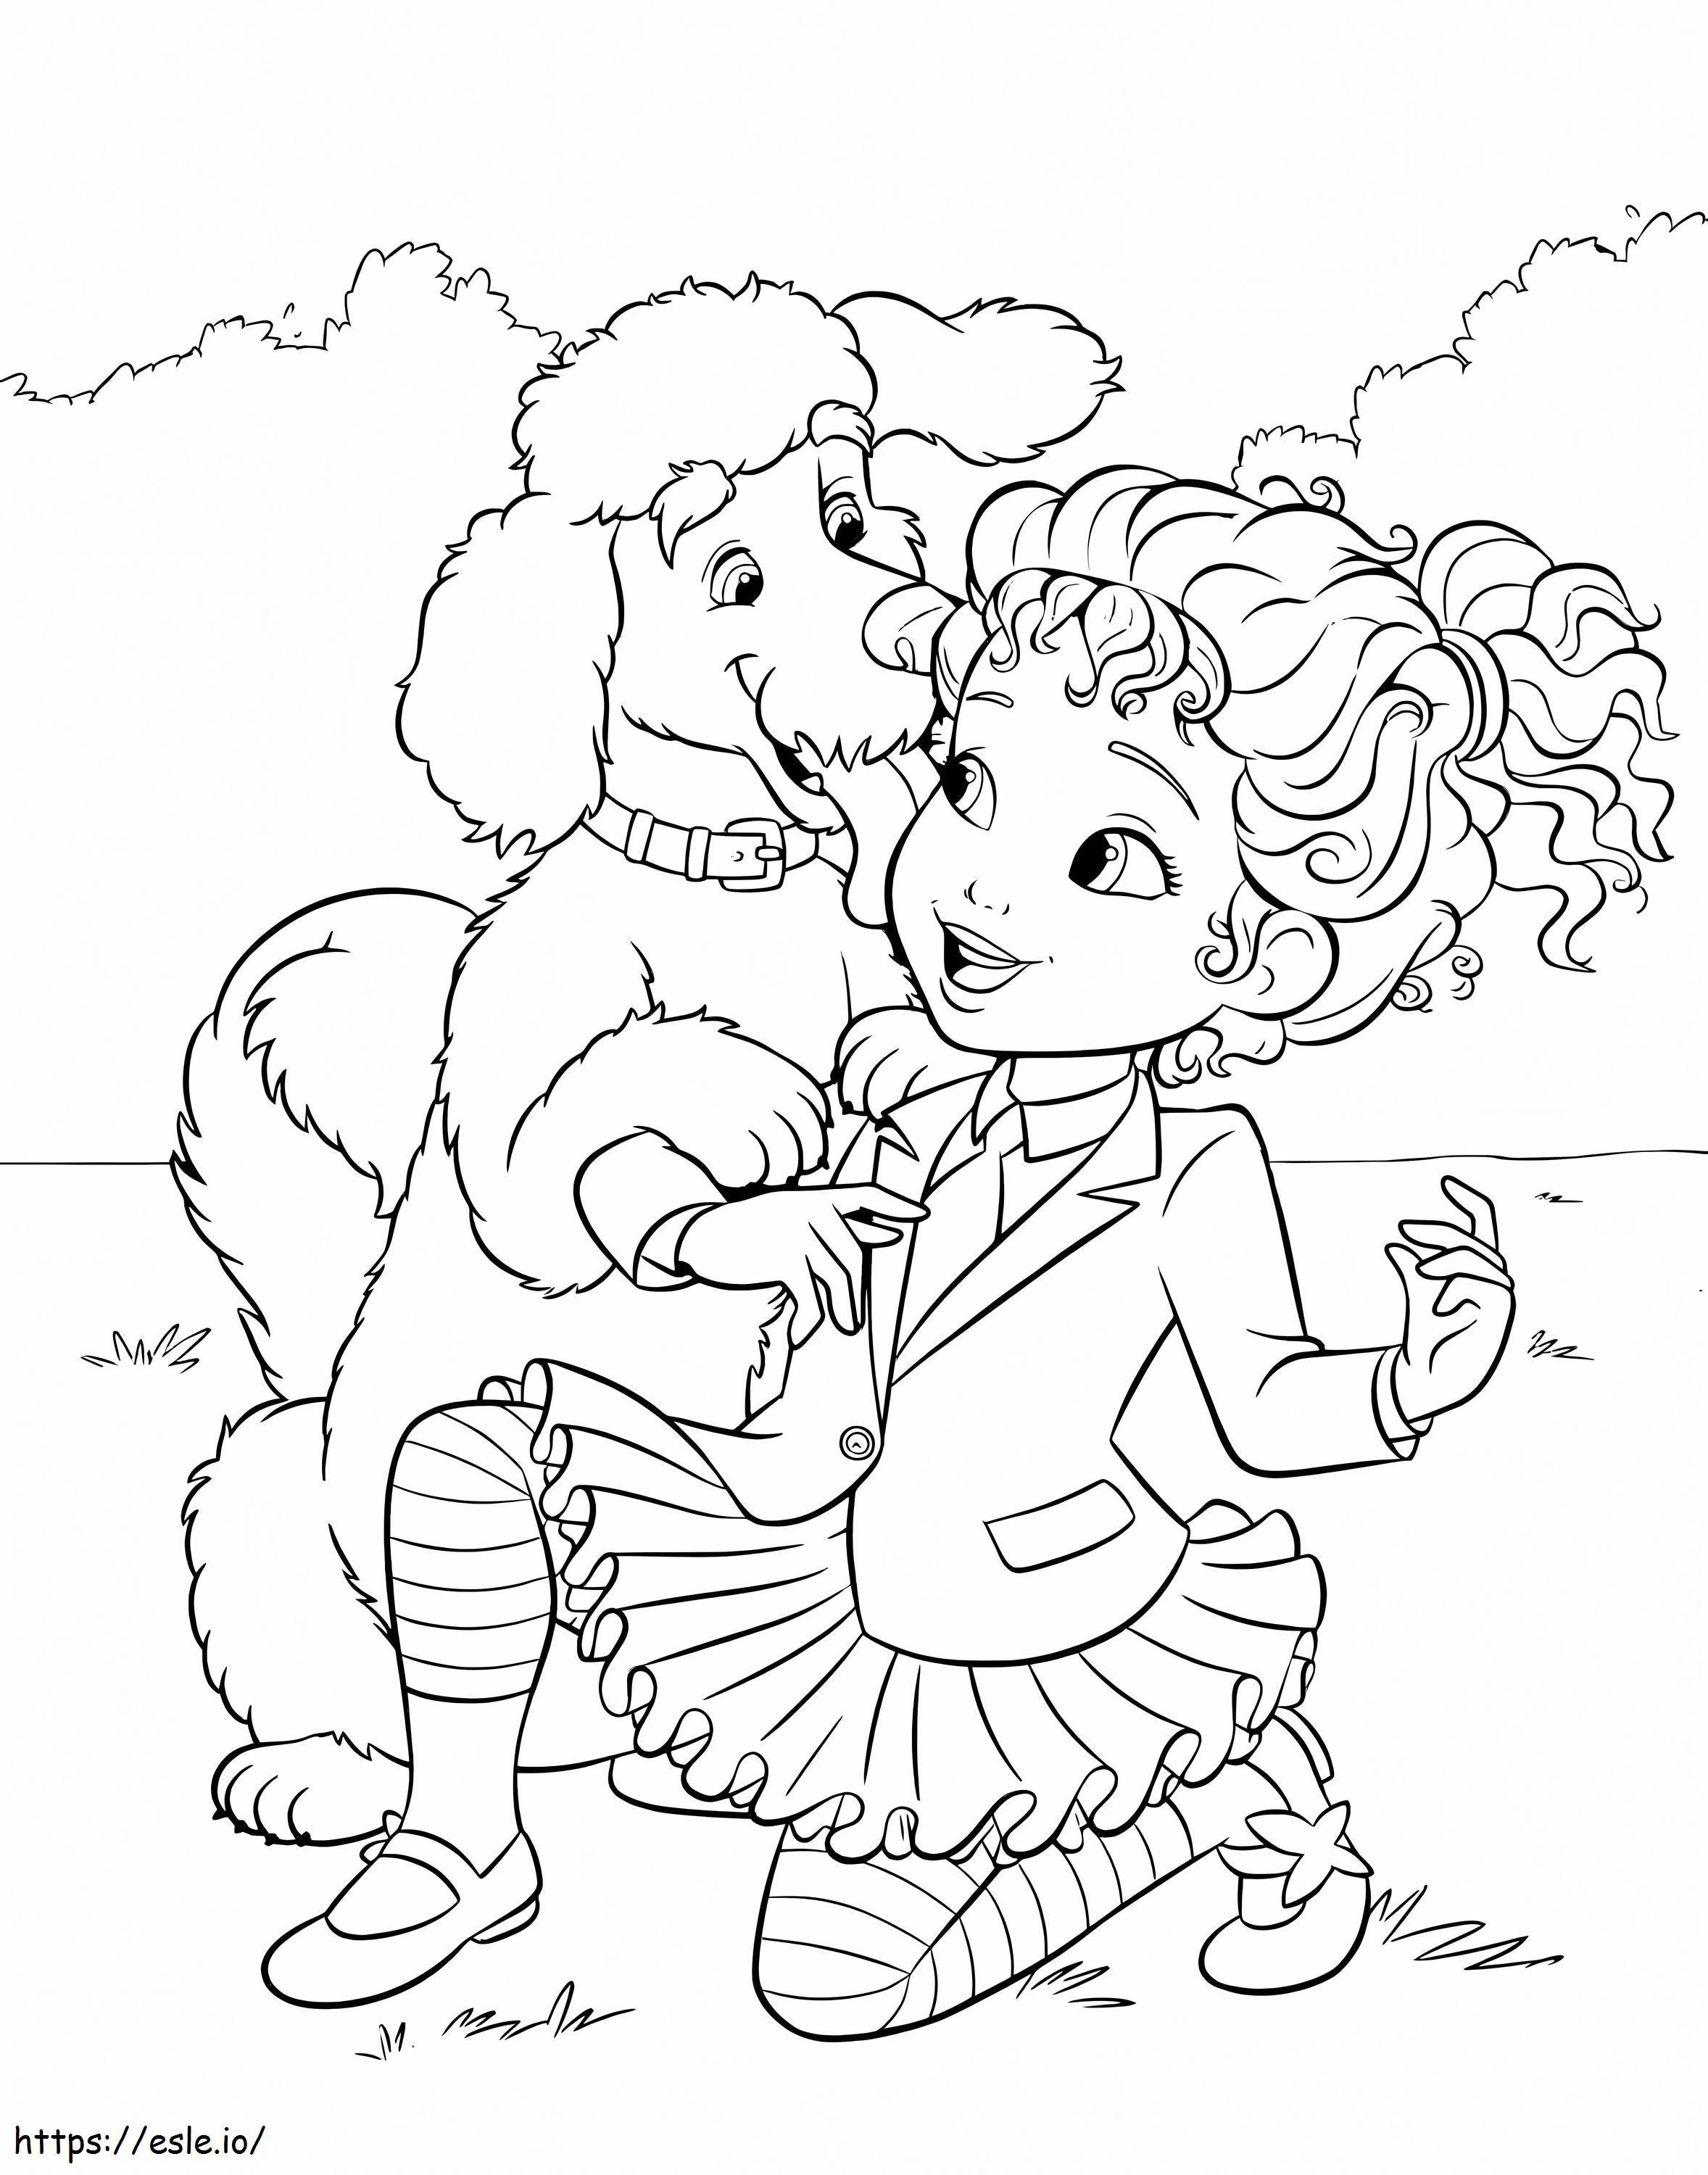 A Dog And A Luxury Nancy coloring page